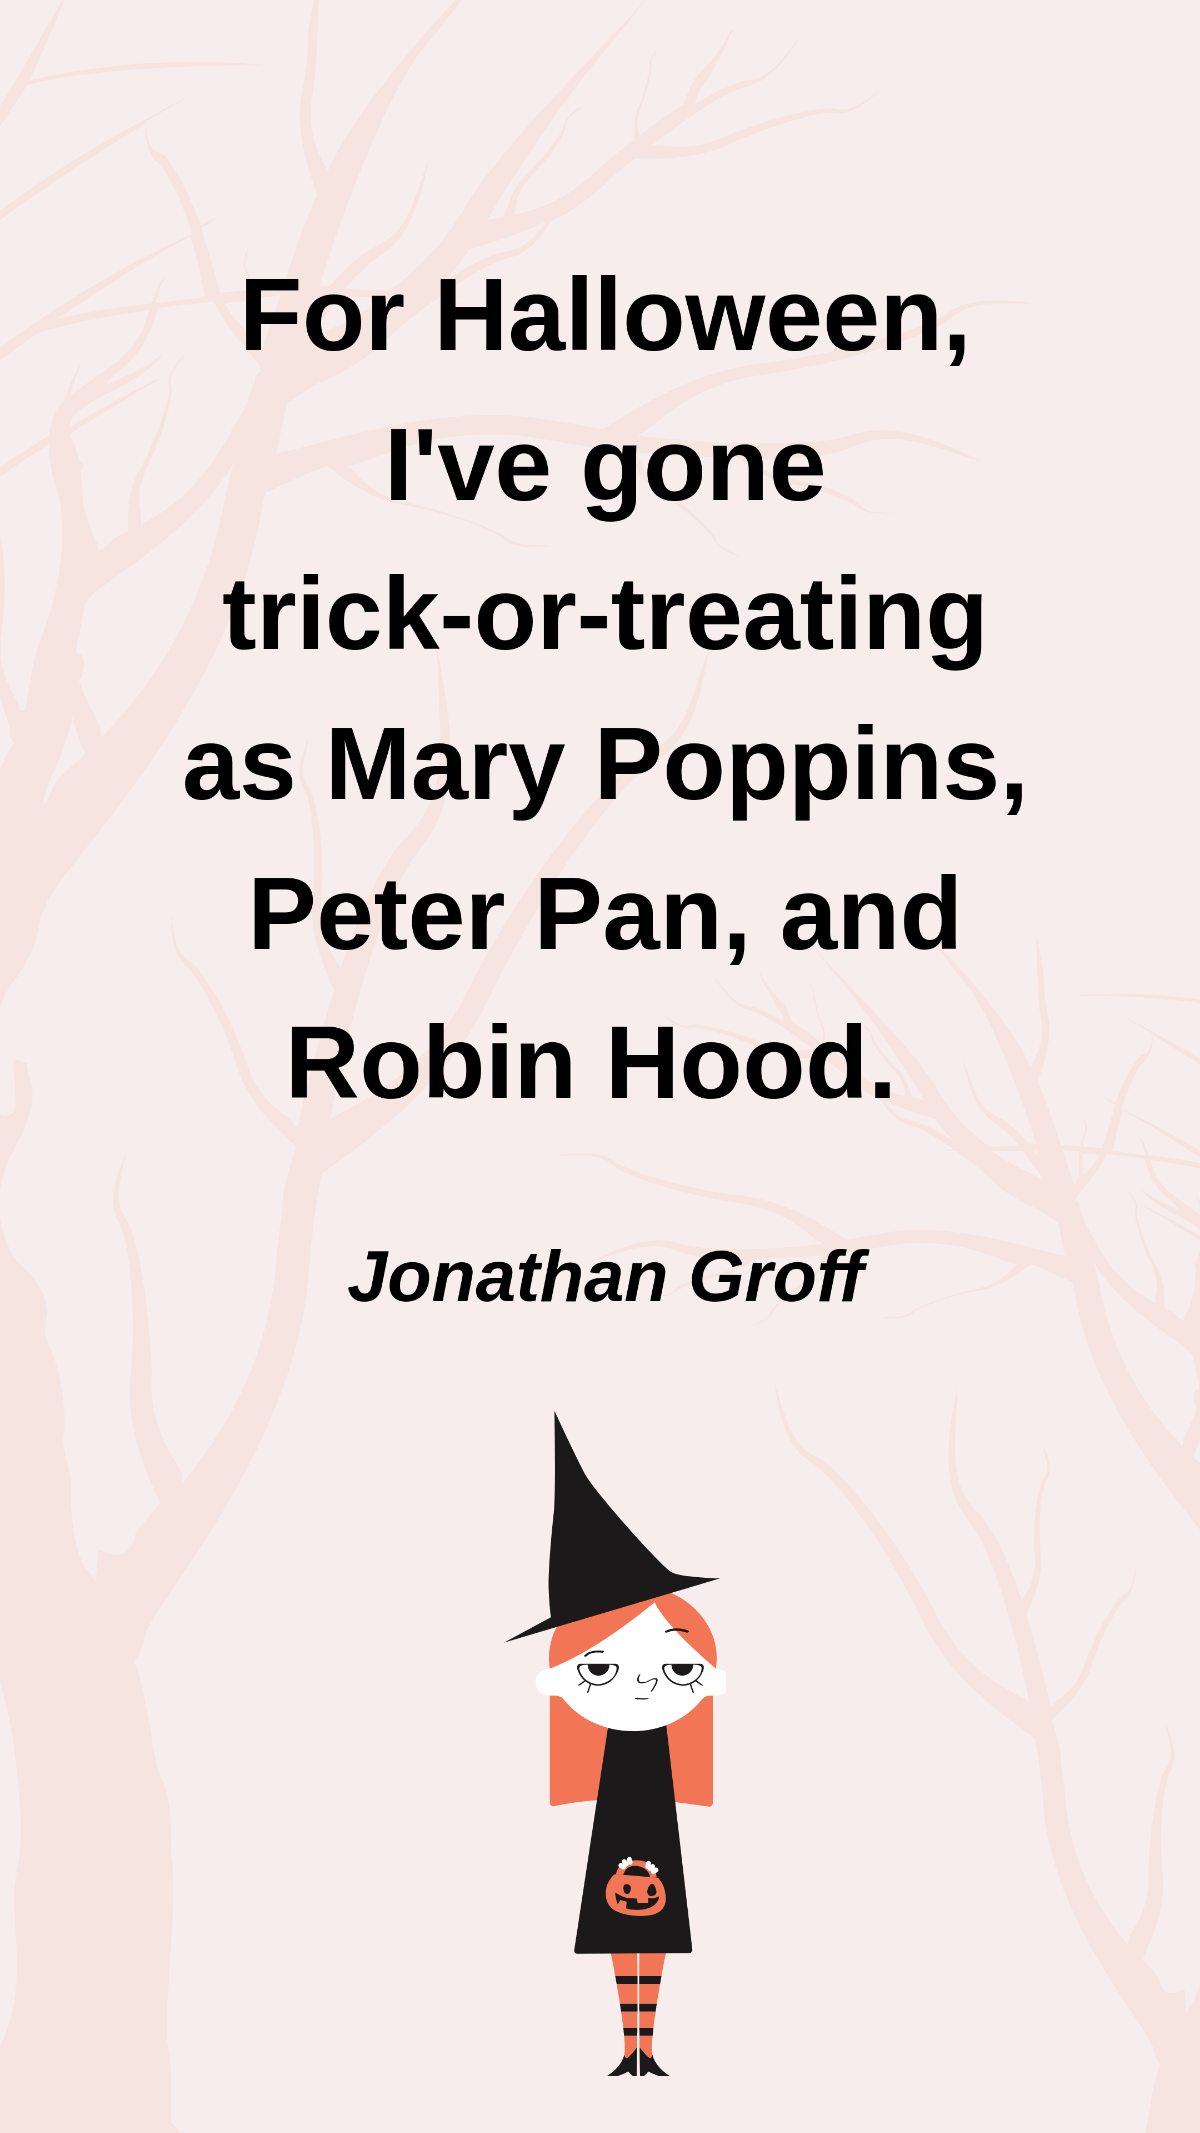 Jonathan Groff - For Halloween, I've gone trick-or-treating as Mary Poppins, Peter Pan, and Robin Hood. Template